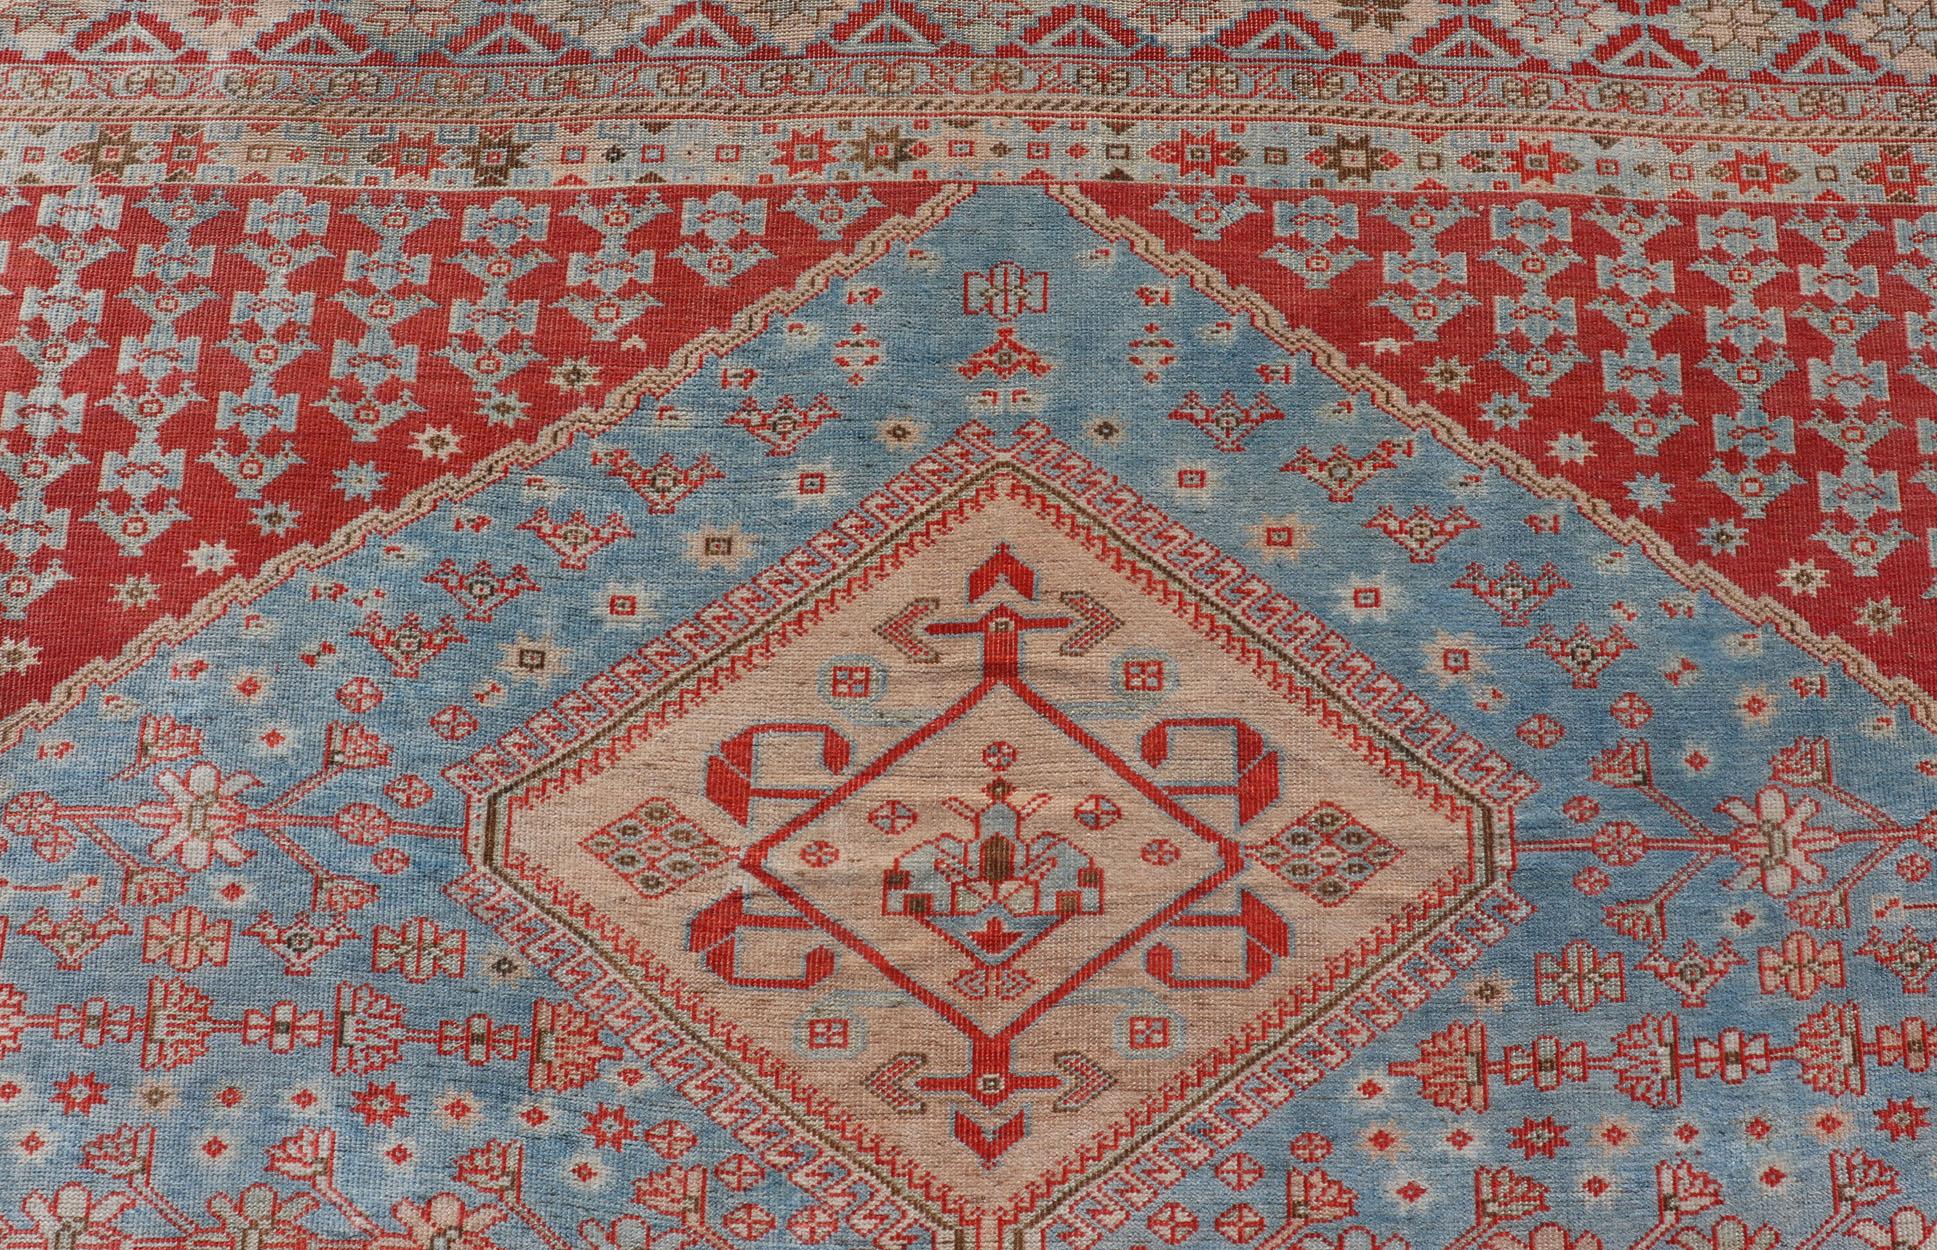 Antique Persian Qashqai Shiraz Tribal Rug with Latch Hooked Diamond Design For Sale 4